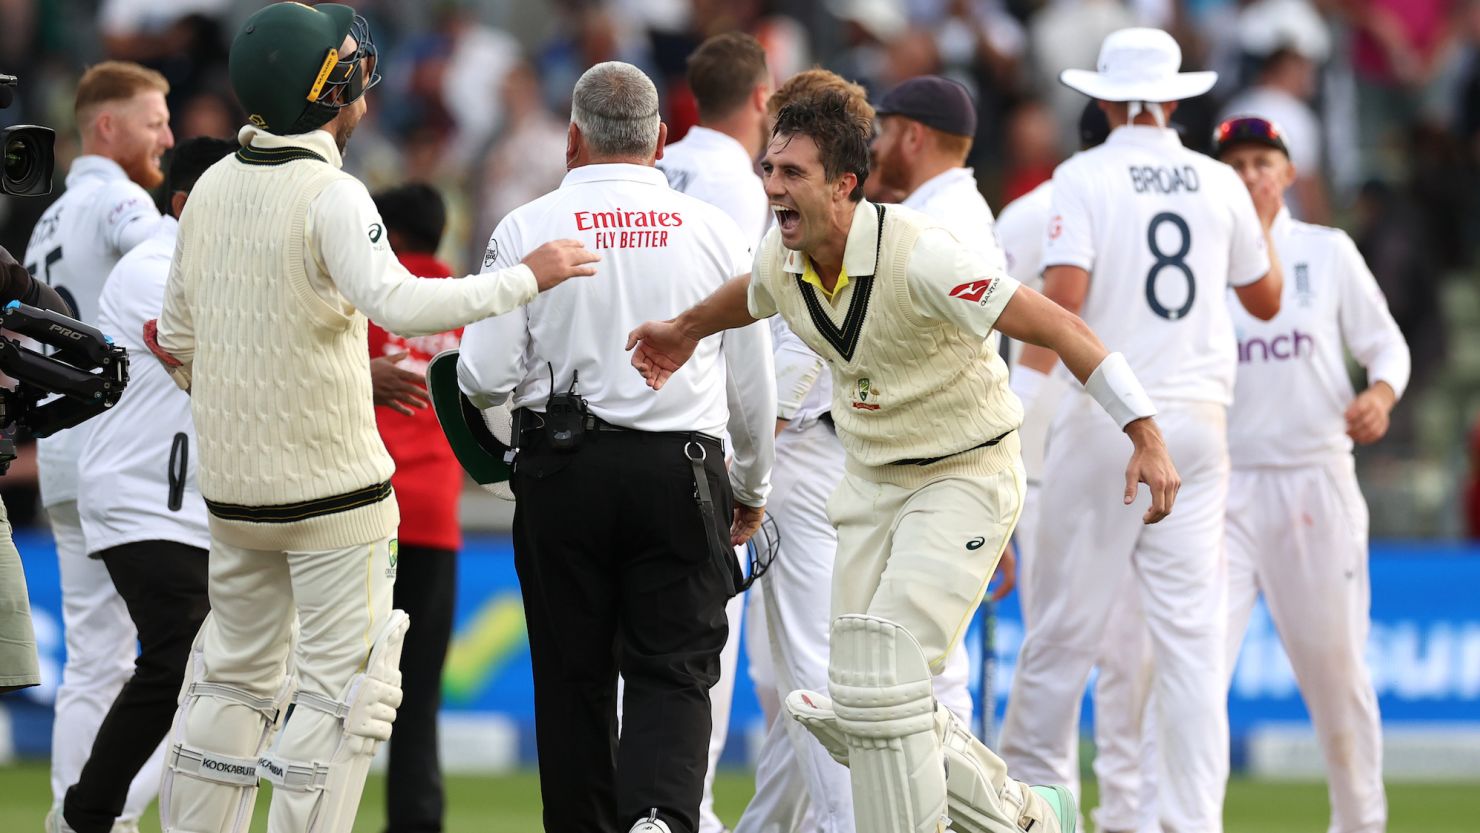 BIRMINGHAM, ENGLAND - JUNE 20: Pat Cummins of Australia and Nathan Lyon of Australia celebrate victory during Day Five of the LV= Insurance Ashes 1st Test match between England and Australia at Edgbaston on June 20, 2023 in Birmingham, England. (Photo by Ryan Pierse/Getty Images)